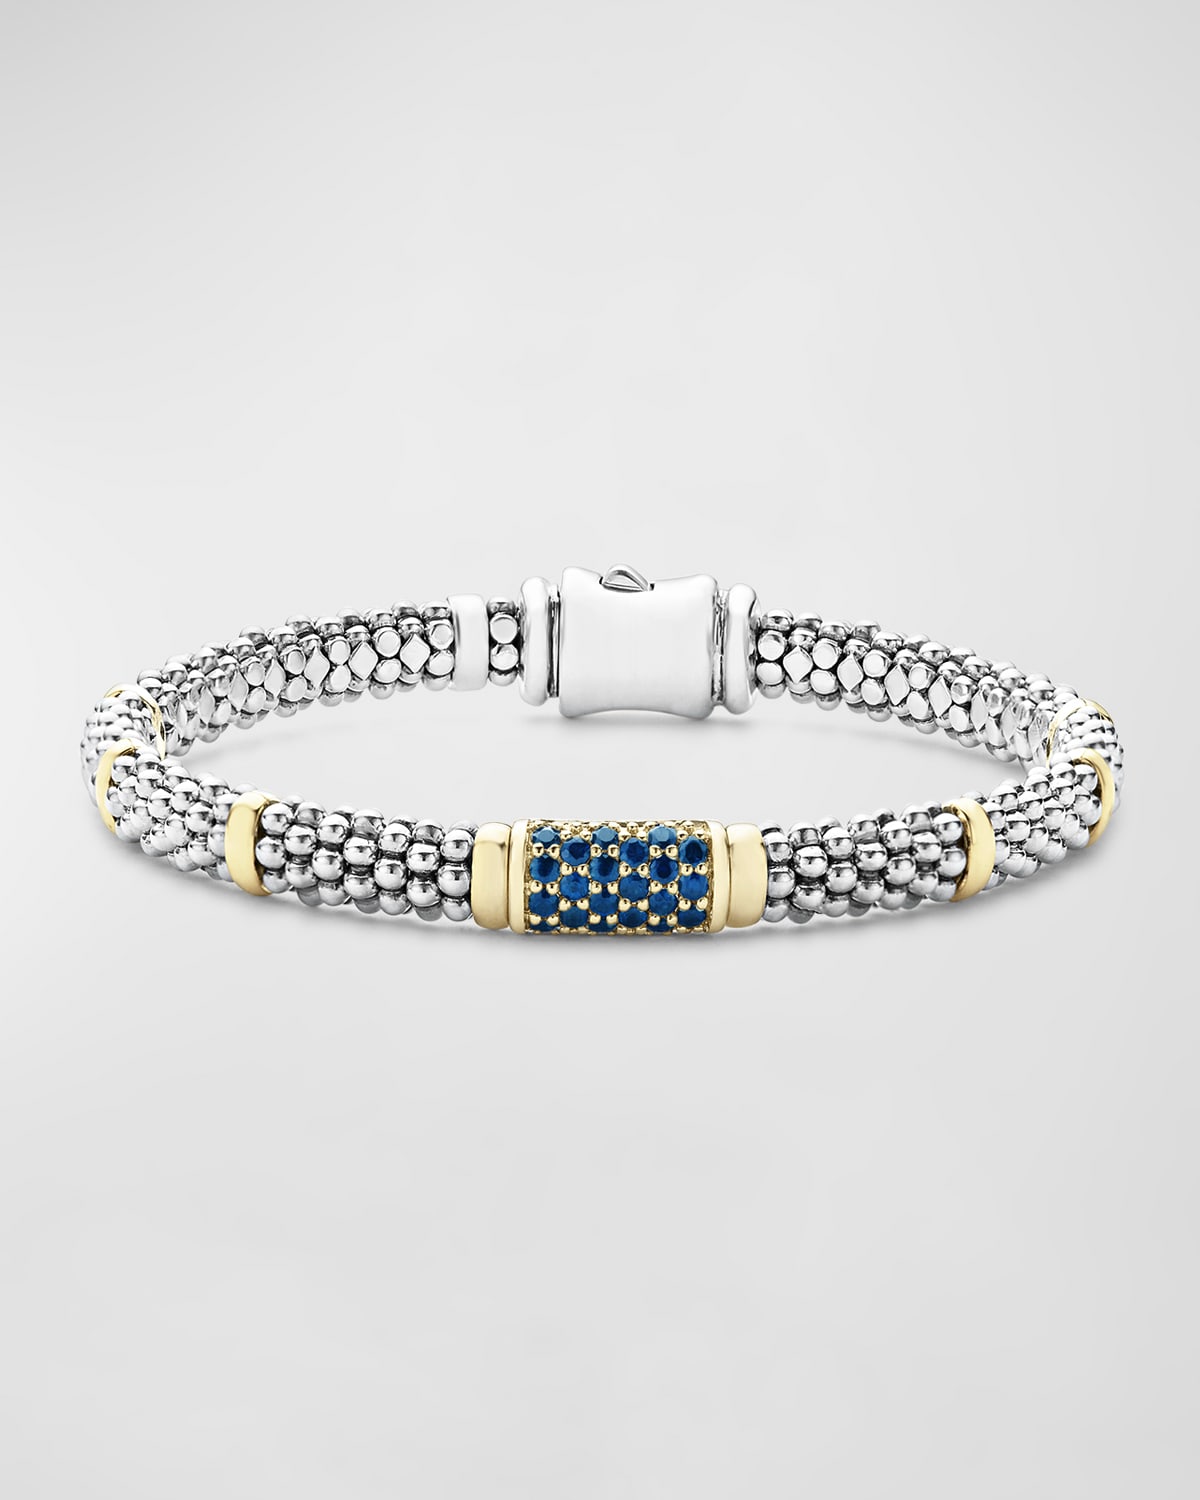 LAGOS 18K GOLD STATION AND STERLING SILVER CAVIAR BEAD BRACELET WITH PAVÉ STATION OF BLUE SAPPHIRES